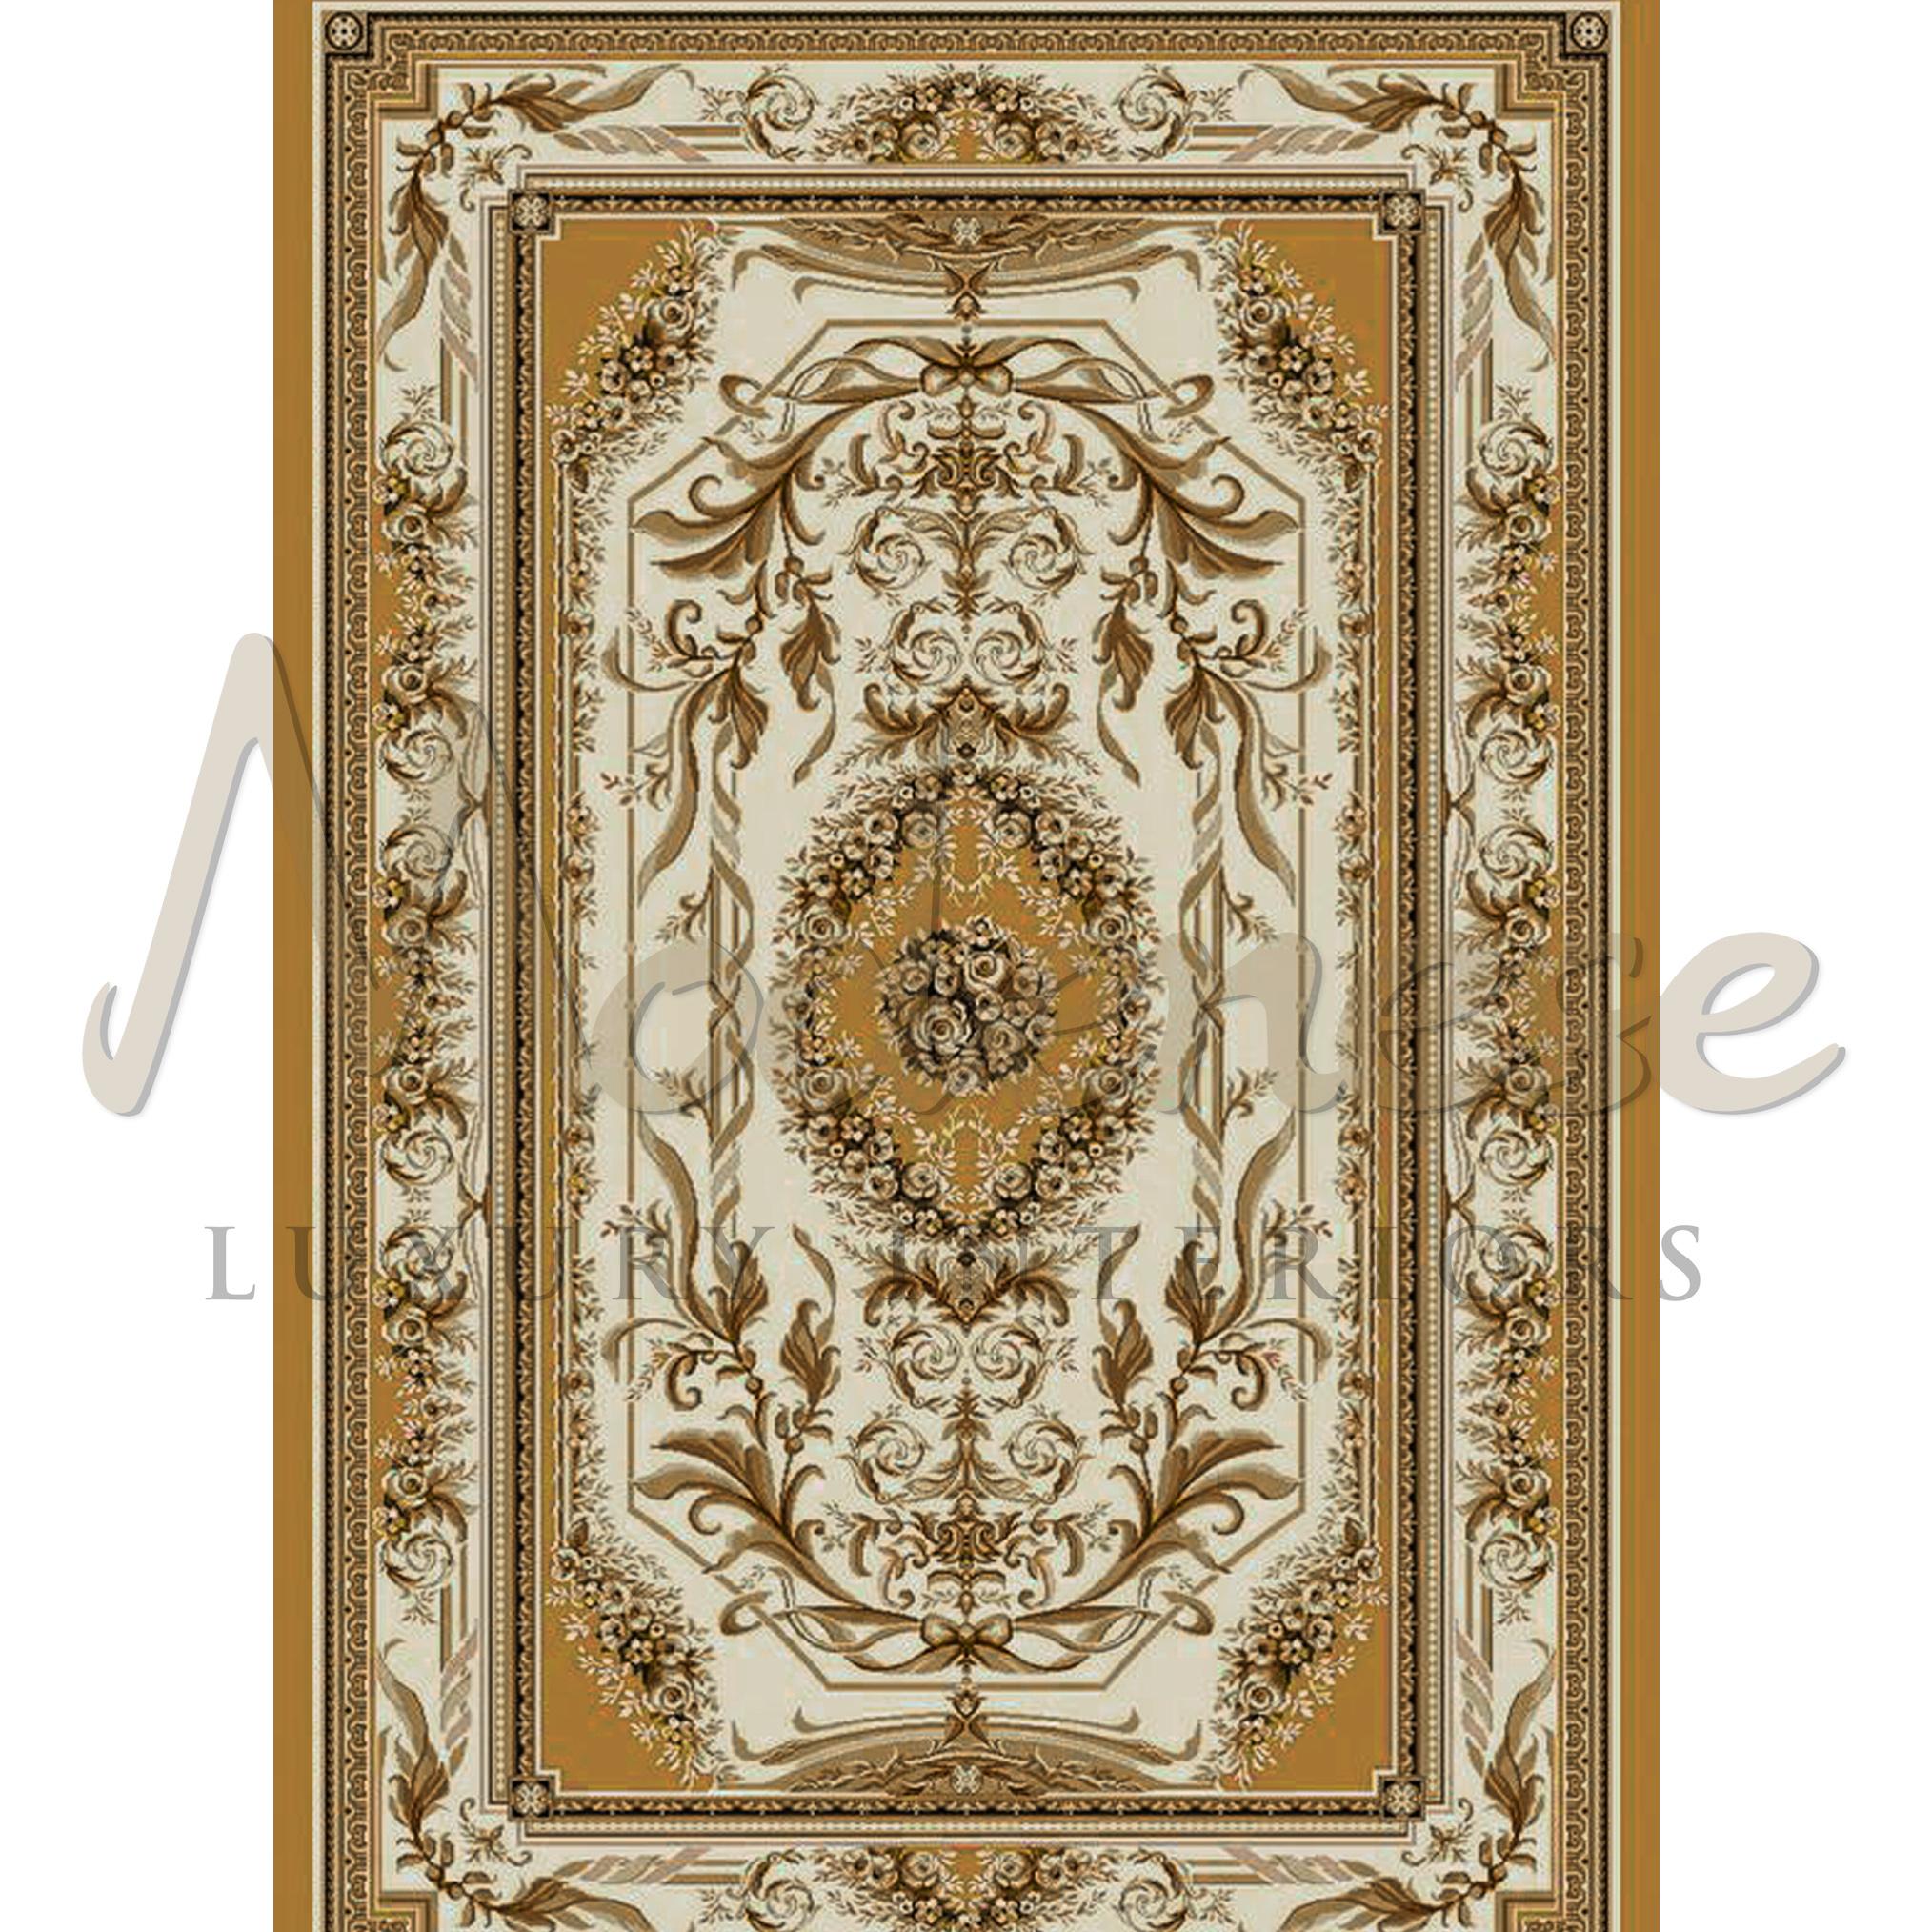 Precious soft 100% bamboo silk oriental rug by Italian producer Modenese Luxury Interiors. Perfect item for a classic ivory-furnished living room. Beige roses and leaves rule over this intricate pattern framed by a white border stripe. Top quality